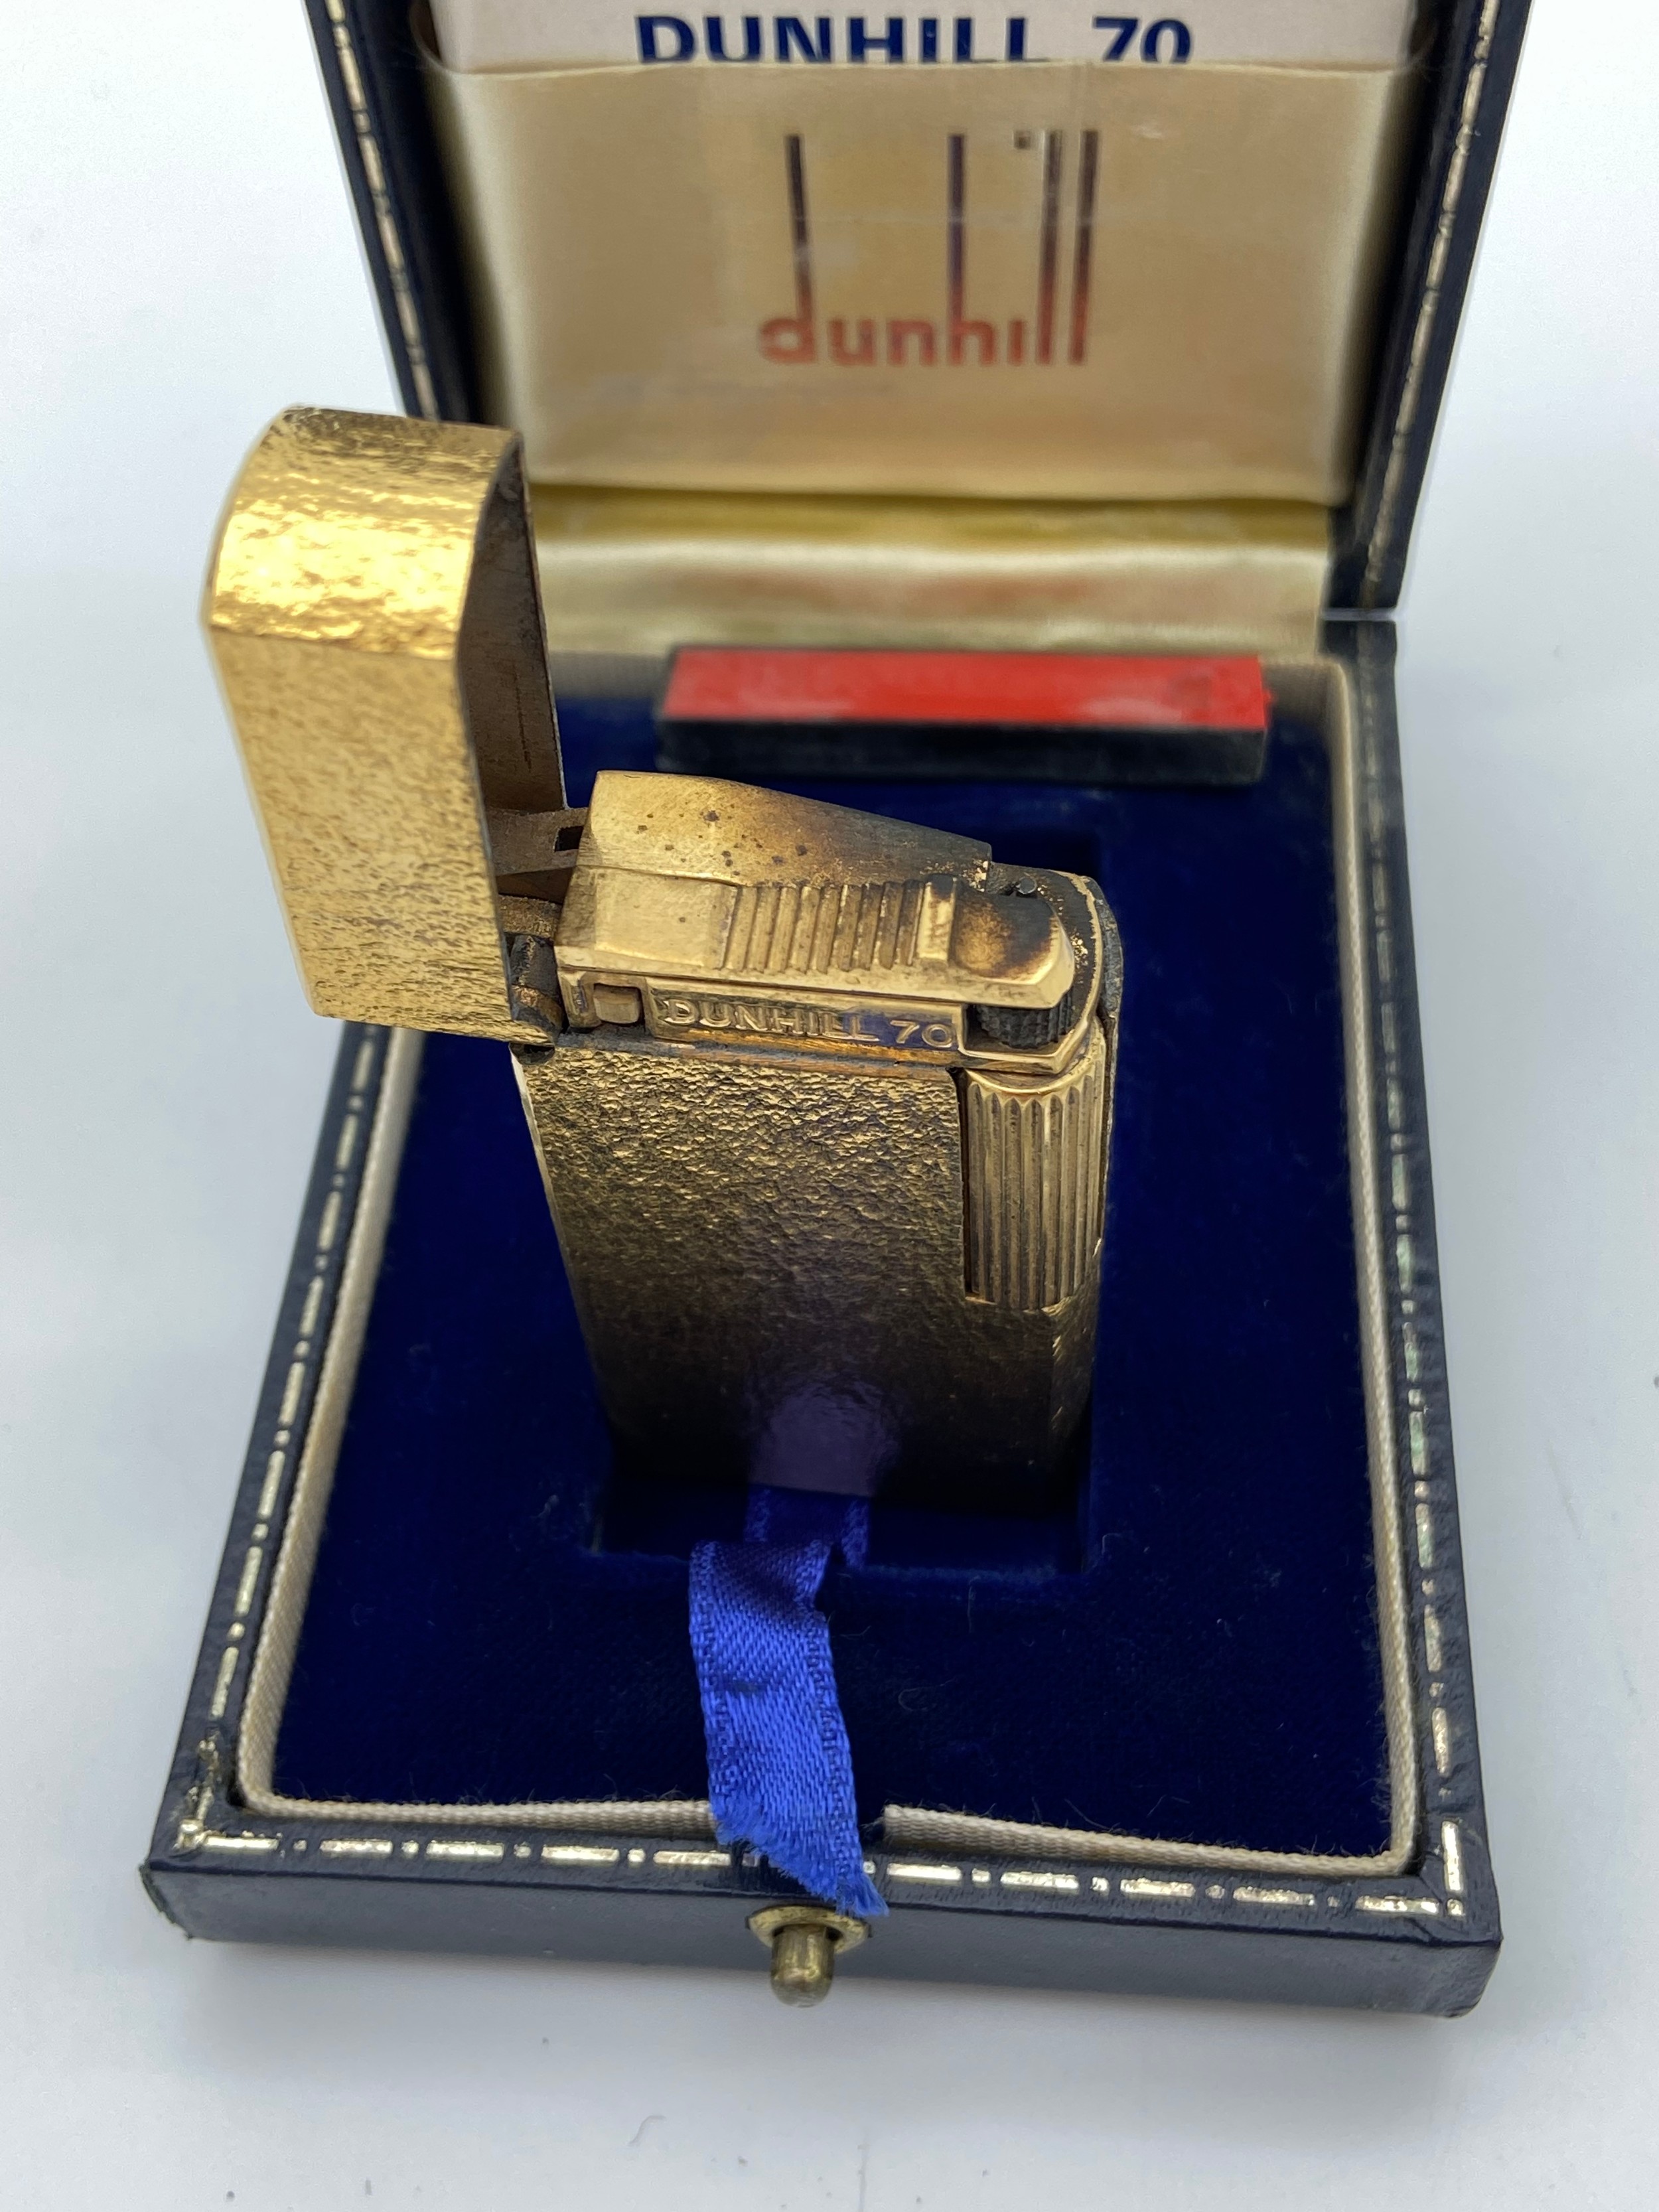 A Vintage Dunhill 70 gold plated lighter, box and instructions - Image 3 of 3